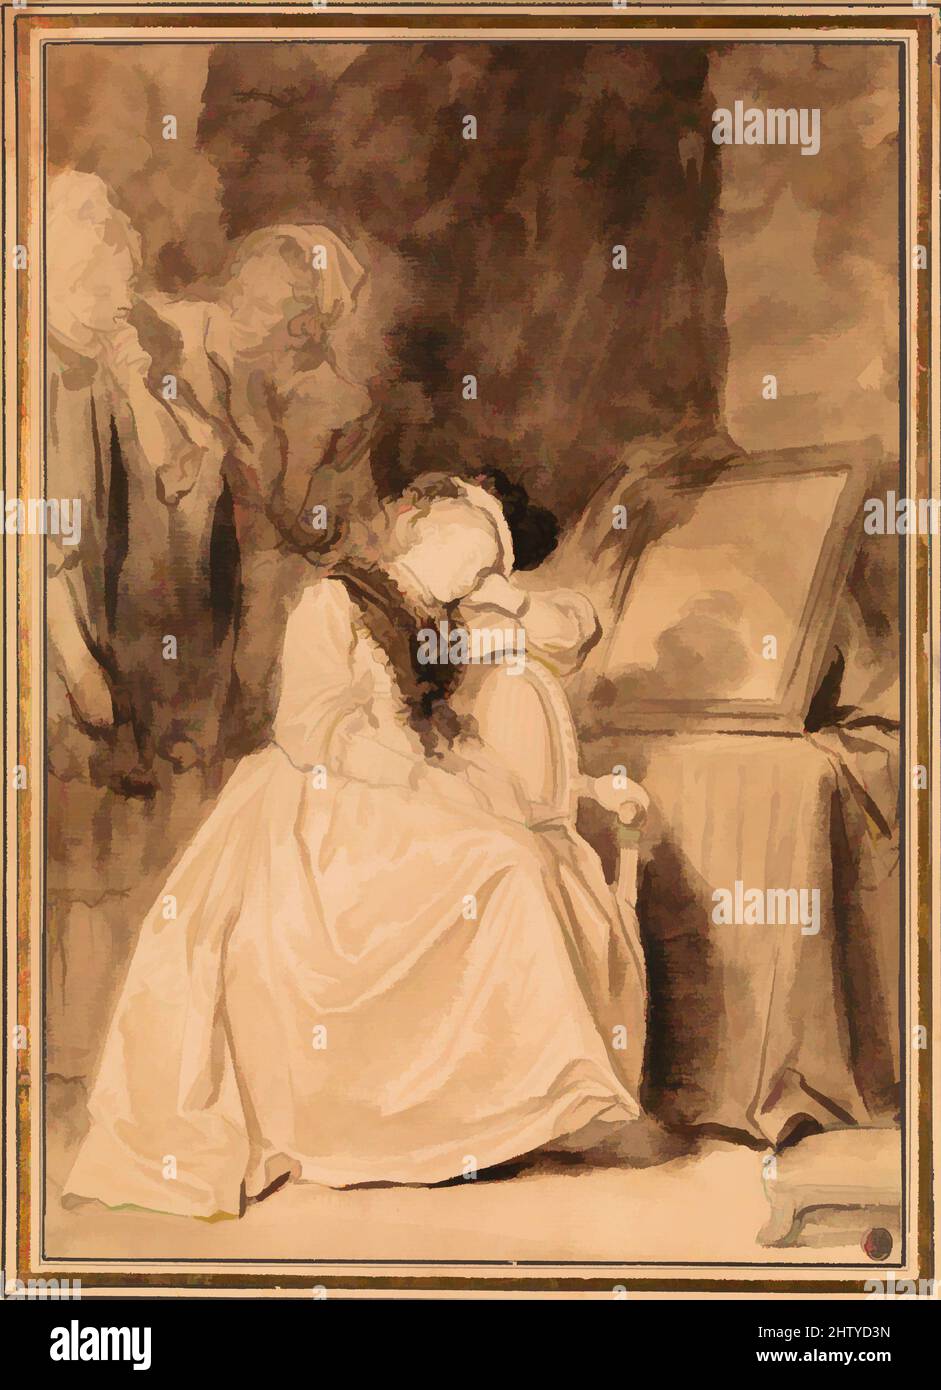 Art inspired by The Dreamer, late 1770s, Pencil and sepia wash, 12 1/8 x 8 1/2 in. (30.8 x 21.6 cm), Drawings, Jean Honoré Fragonard (French, Grasse 1732–1806 Paris), Fragonard was trained as a history painter and received ample recognition from the Royal Academy in Paris, but he soon, Classic works modernized by Artotop with a splash of modernity. Shapes, color and value, eye-catching visual impact on art. Emotions through freedom of artworks in a contemporary way. A timeless message pursuing a wildly creative new direction. Artists turning to the digital medium and creating the Artotop NFT Stock Photo